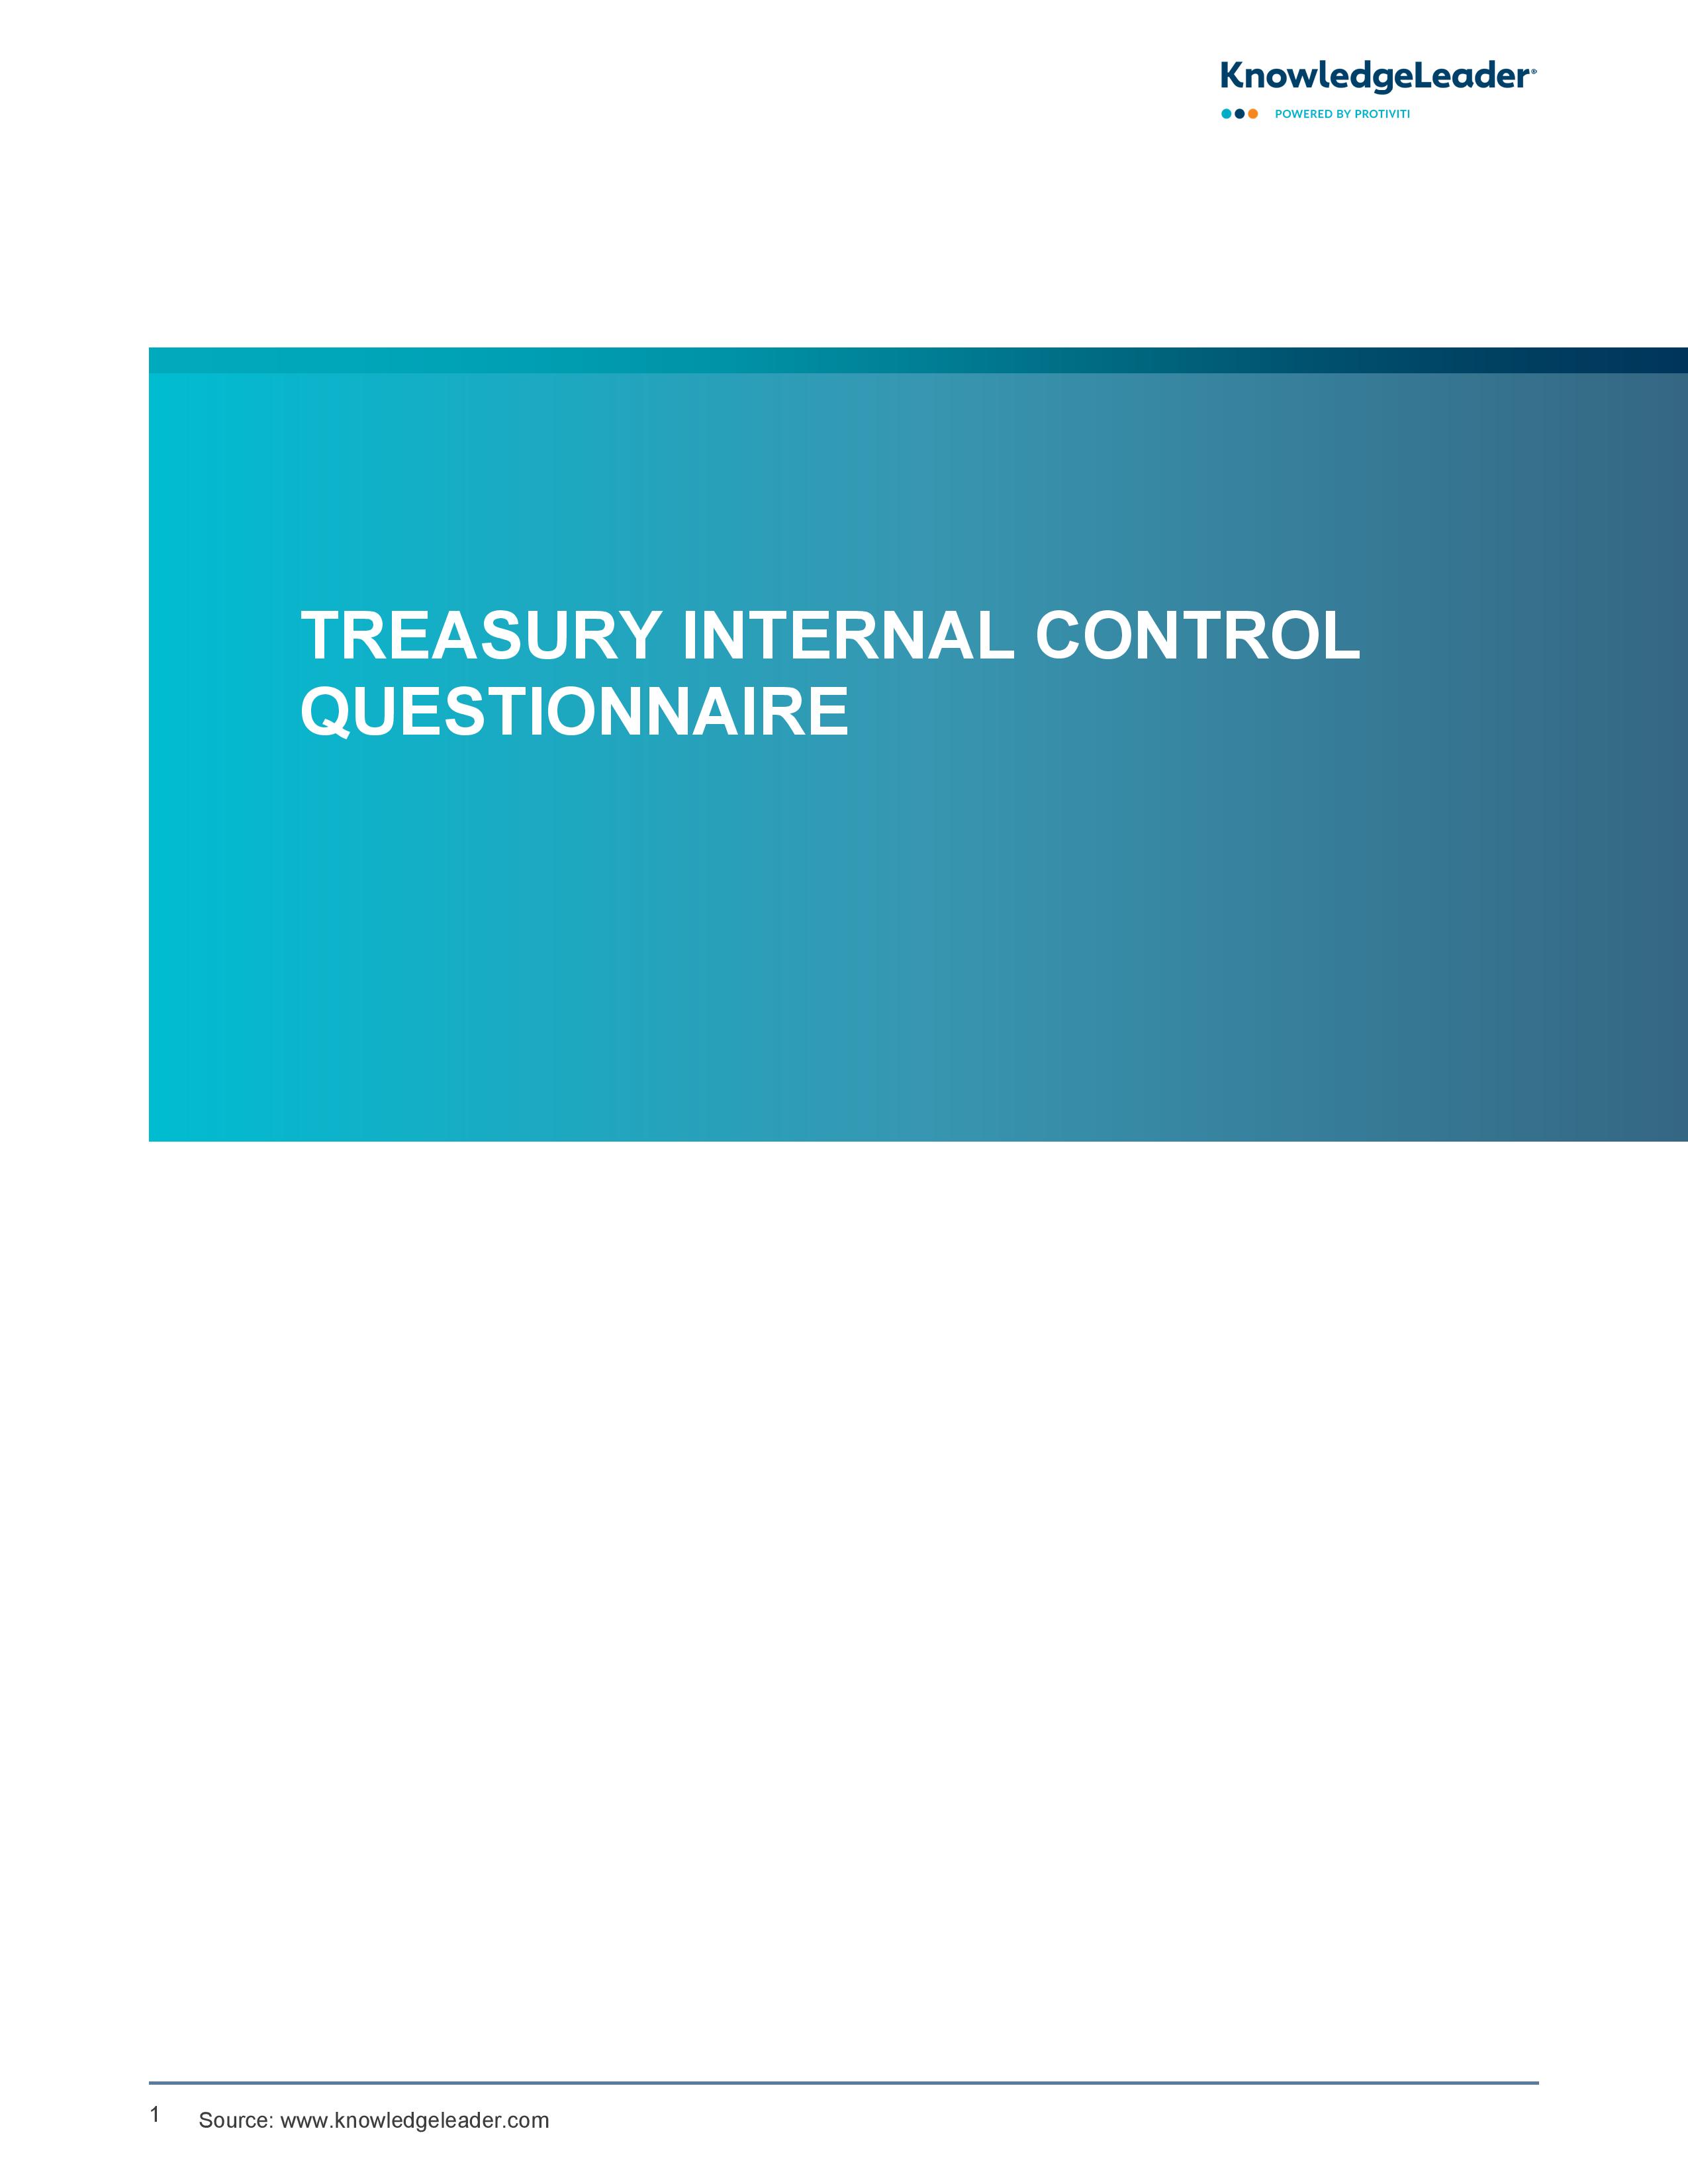 Screenshot of the first page of Treasury Internal Control Questionnaire